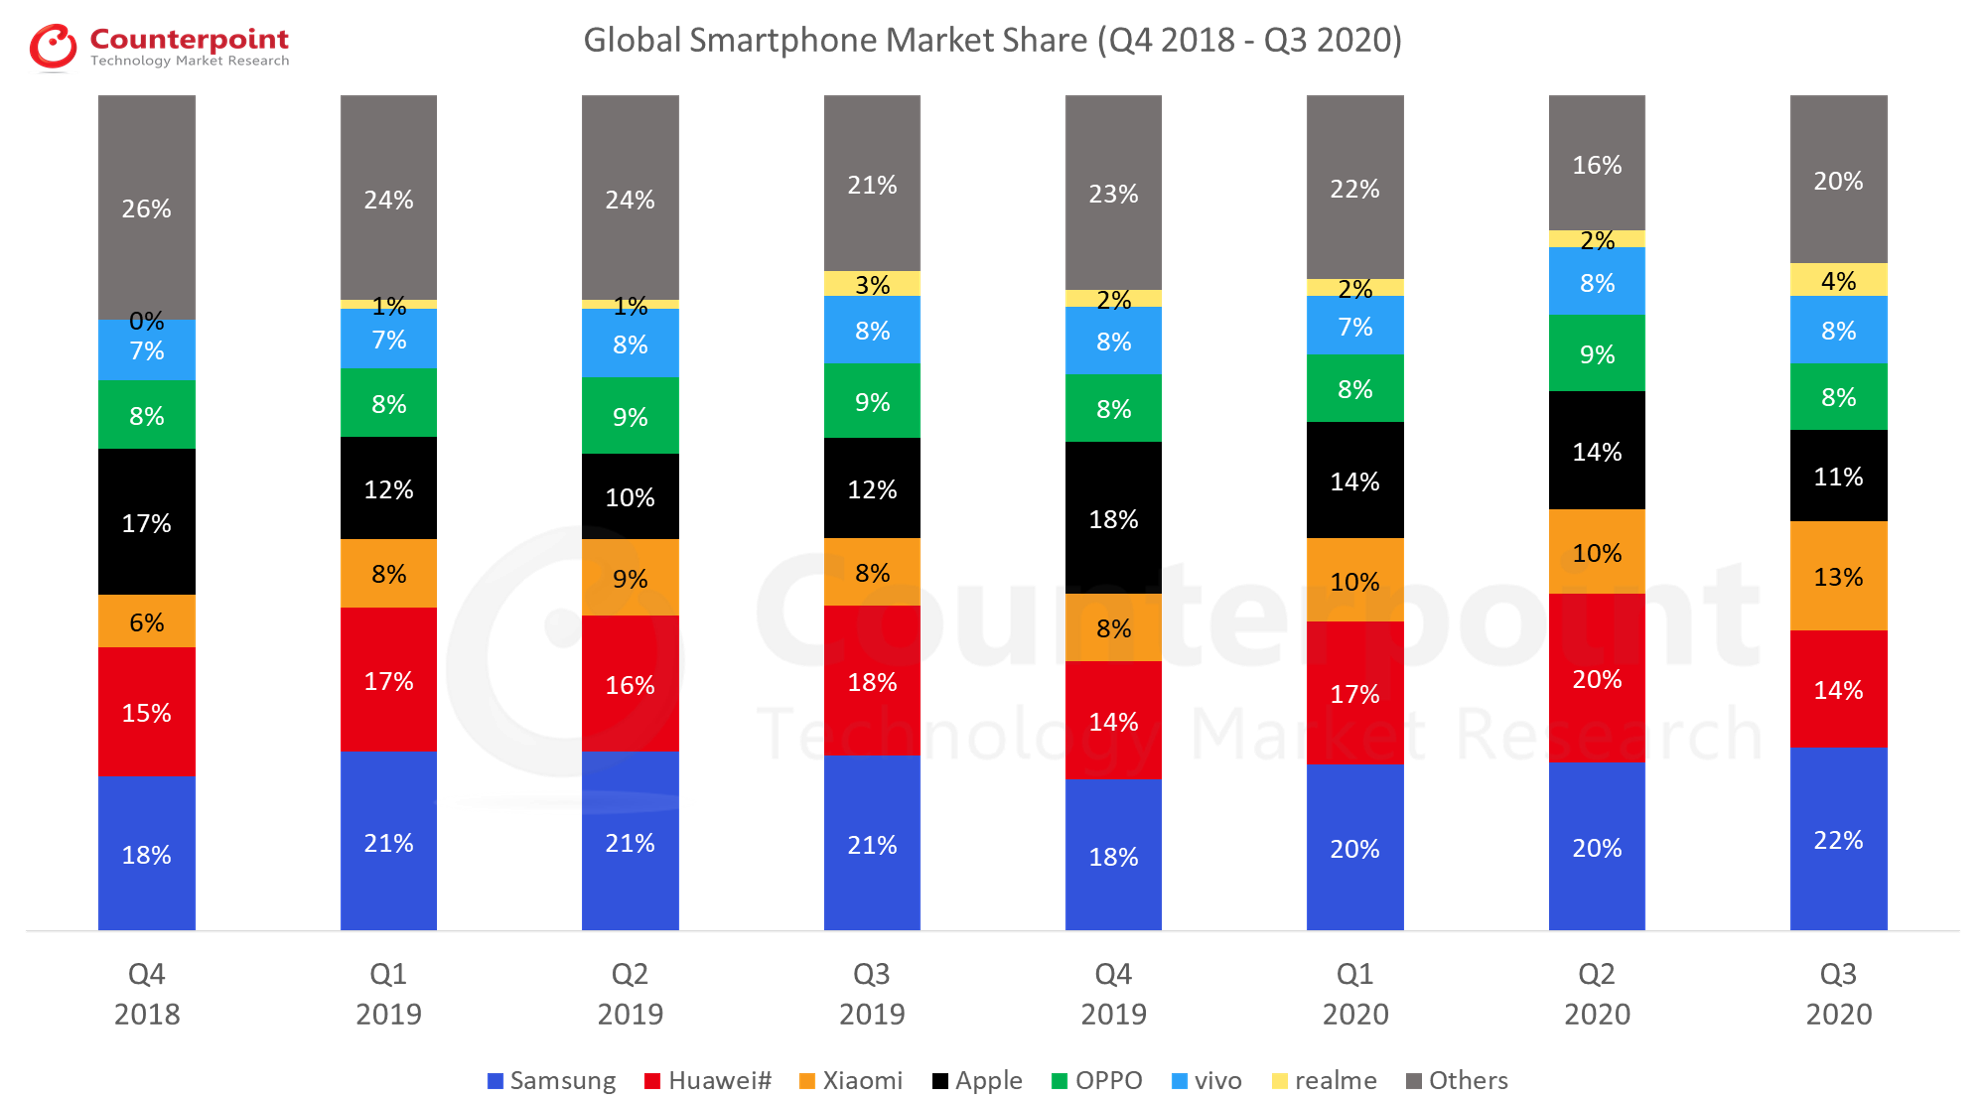 Counterpoint Research Q3 2020 Global Smartphone Market